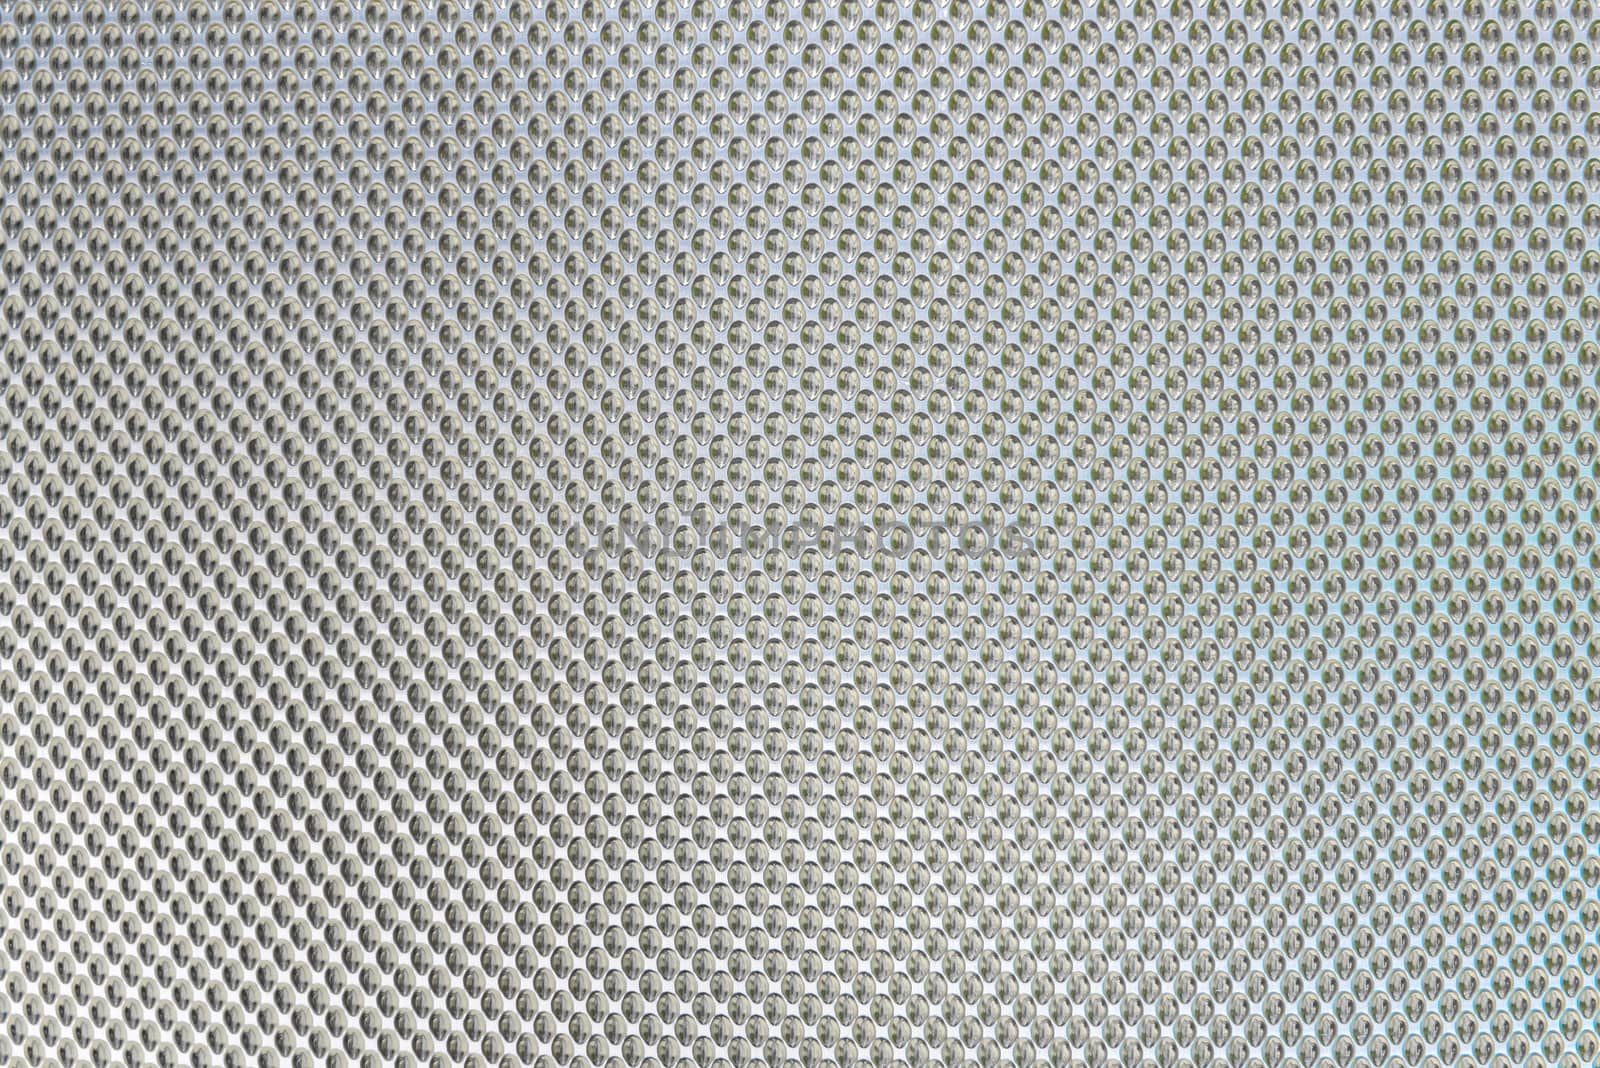 texture metal background of brushed steel plate.